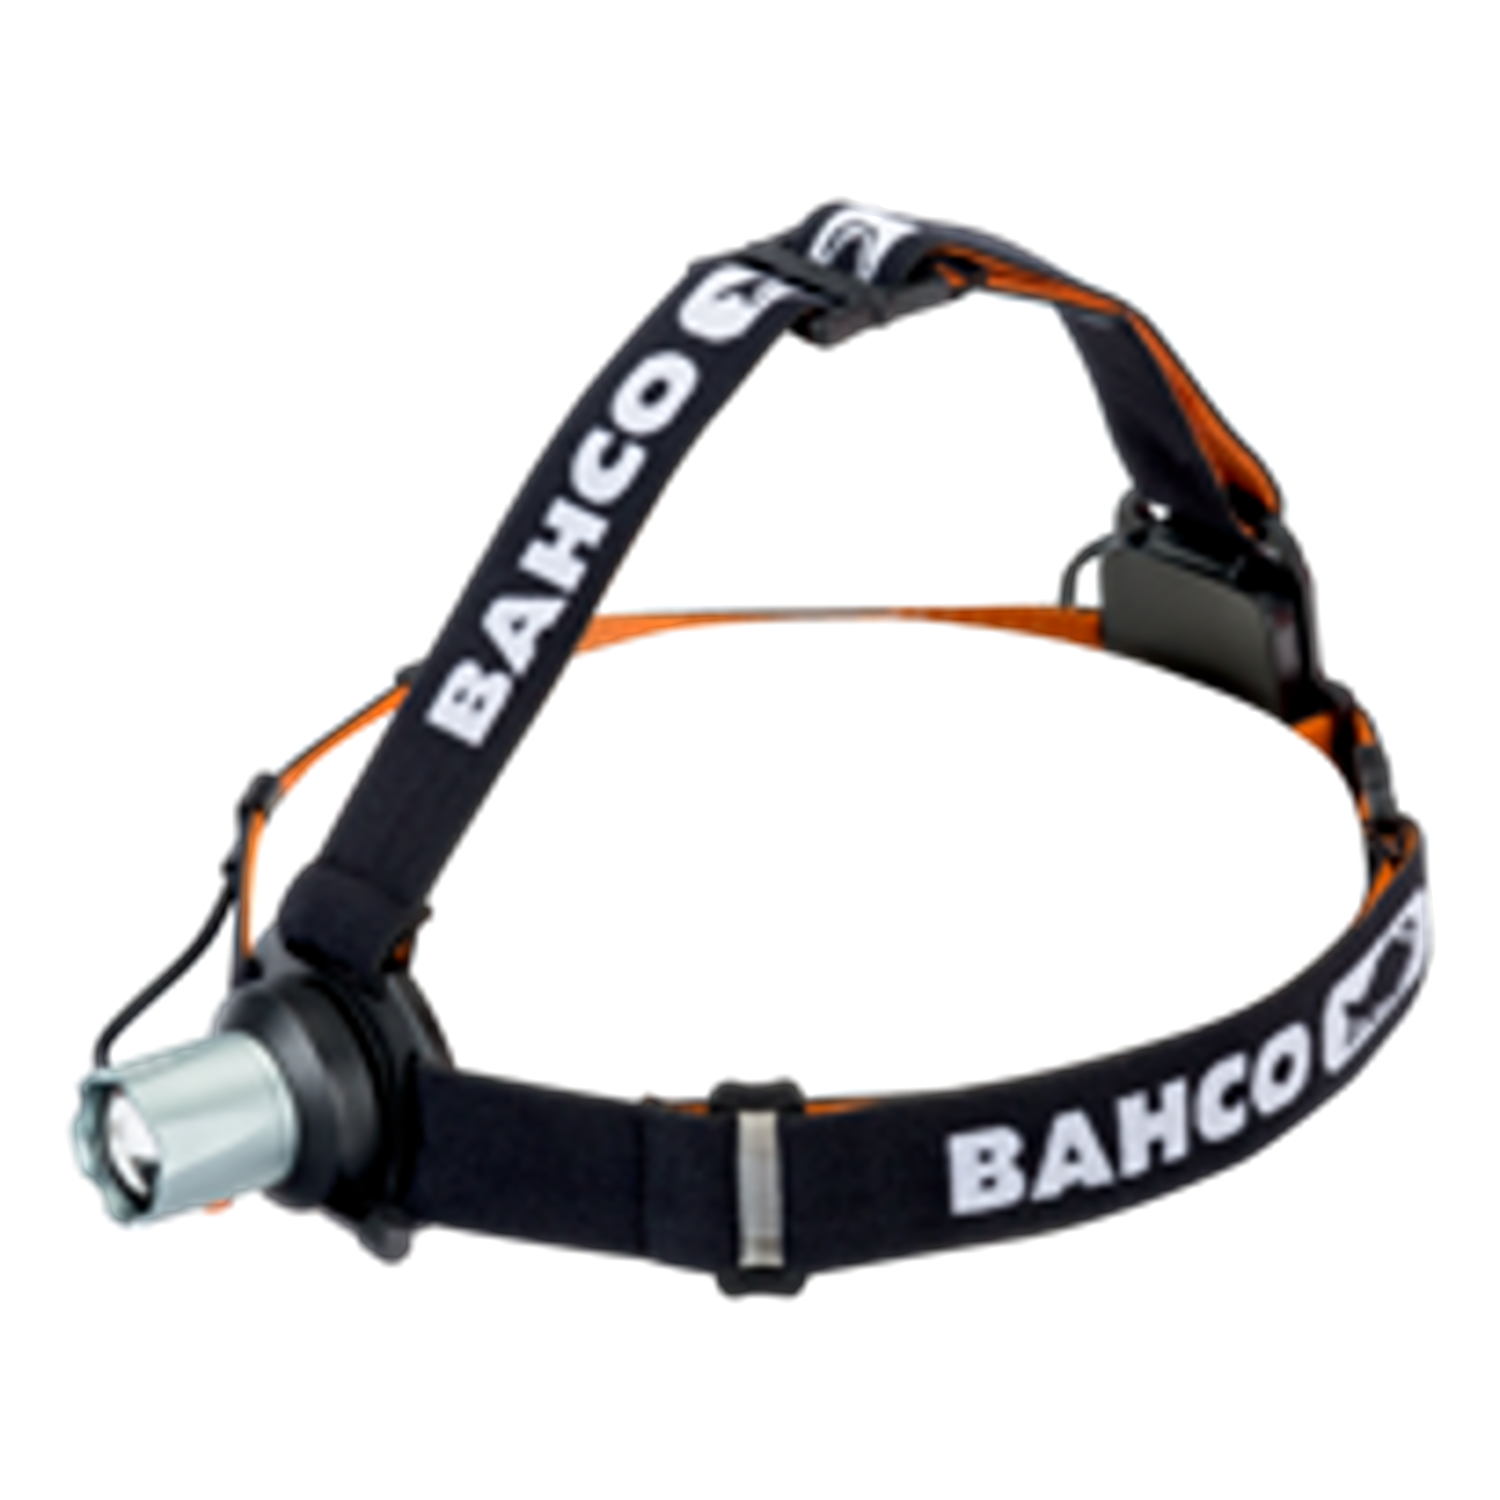 BAHCO TAHBFRL11 Head Torch with Dyneema String (BAHCO Tools) - Premium Head Torch from BAHCO - Shop now at Yew Aik.